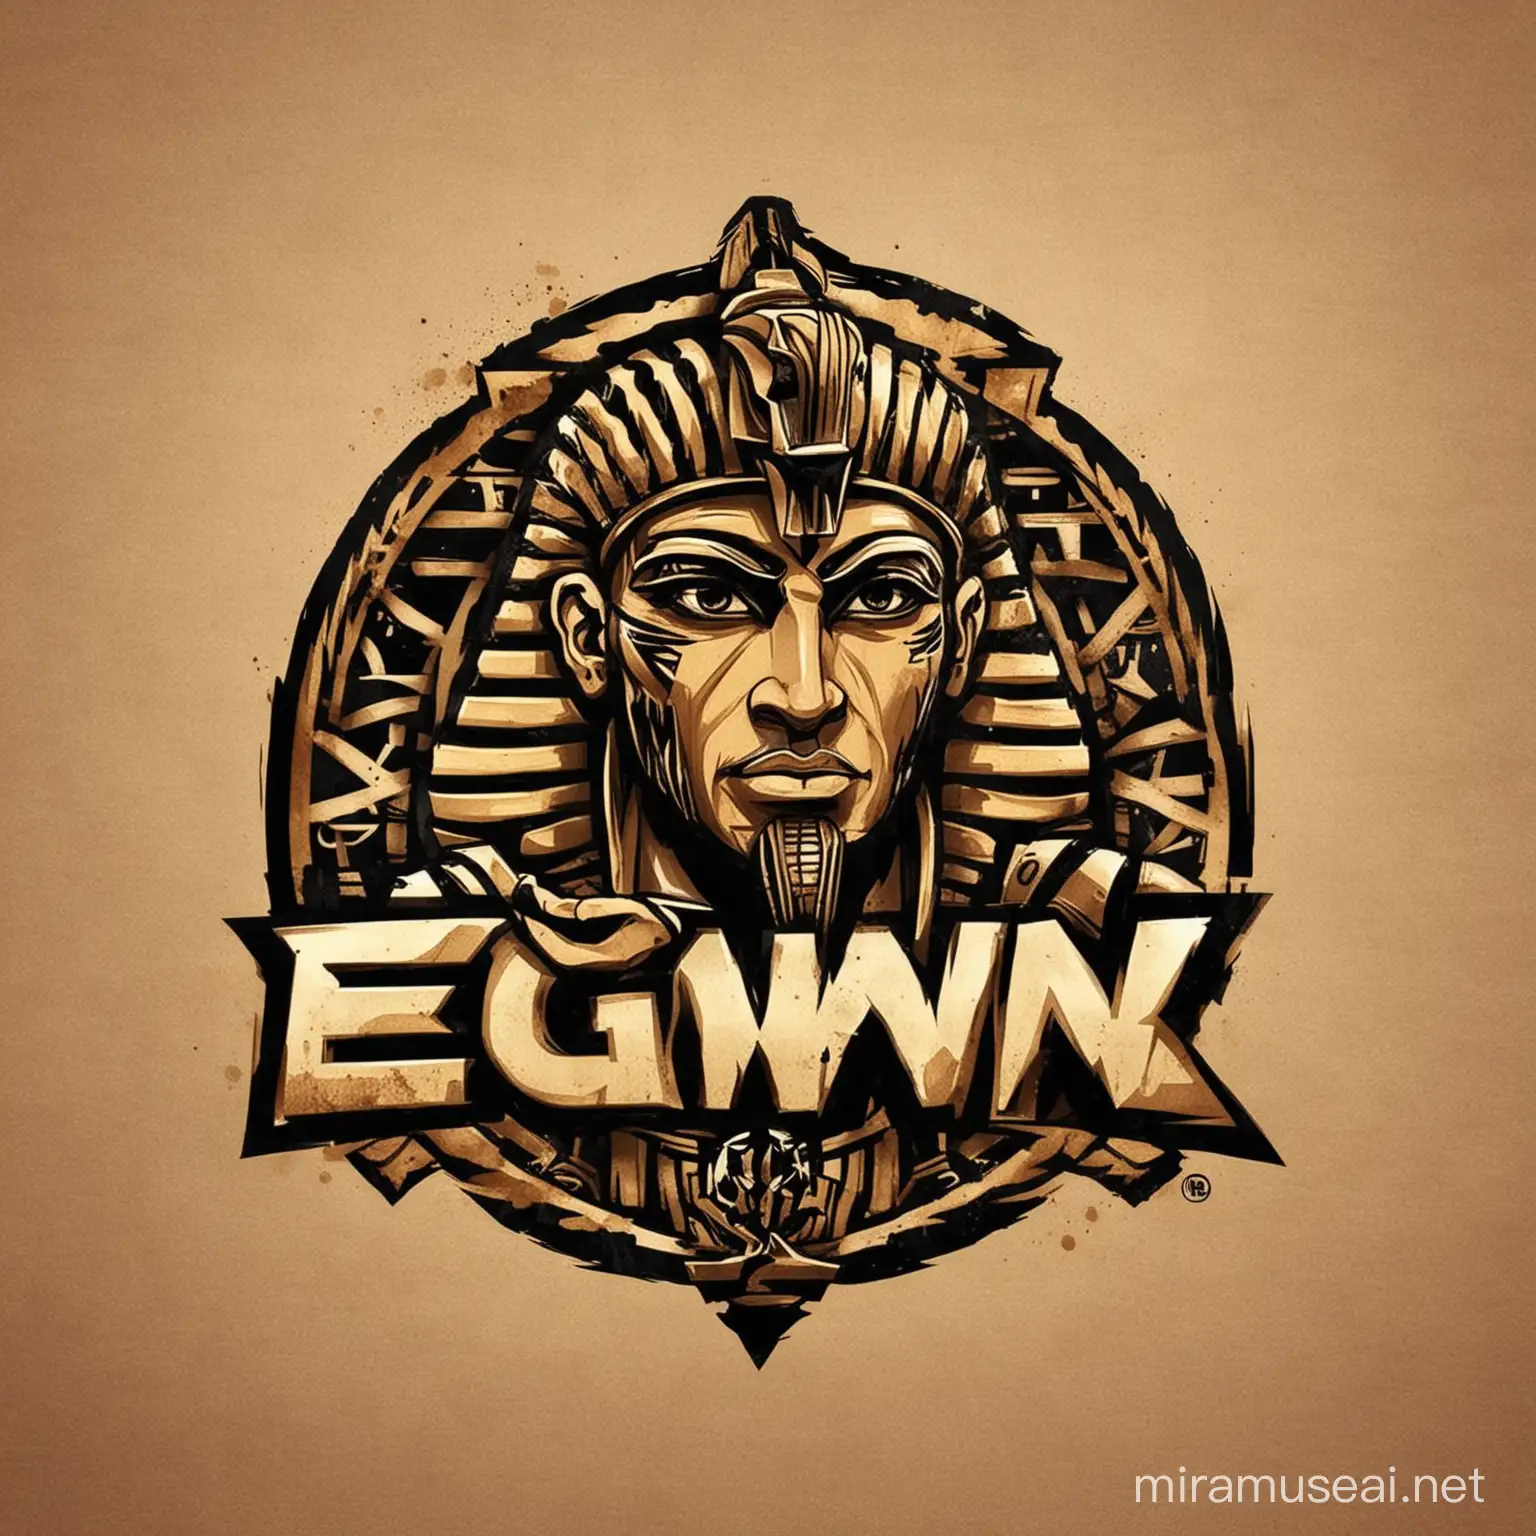  Logo for an Egyptian pro wrestling company called EGW